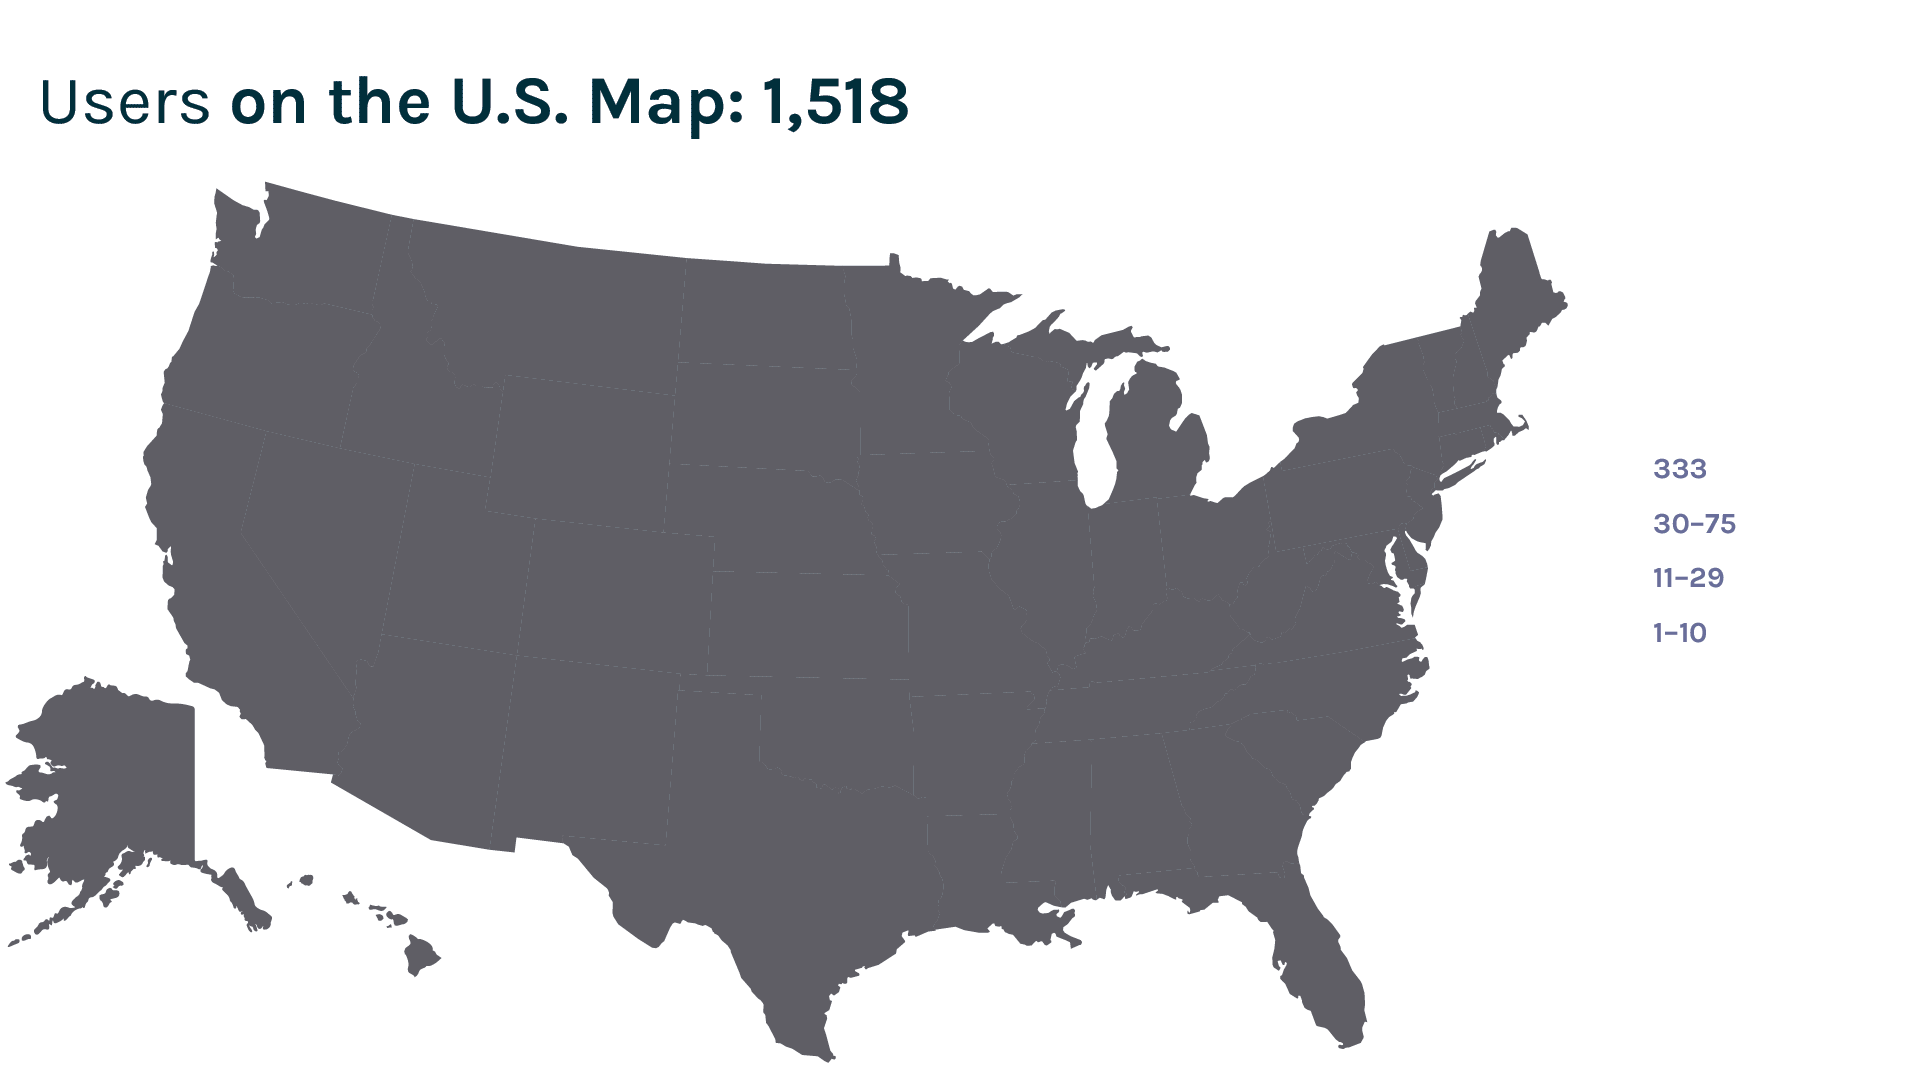 Users on the U.S. Map: 1,518. Motion graphic shows CA (333 users); WA, AZ, CO, TX, MN, WI, MI, IL, MO, TN, NC, GA, FL, NY and MS (30-75 users); OR, MT, UT, NM, NE, IA, OH, AL, VA, MD, DE PA, NJ, CT and NH (11-29 users); an AL, NV, ID, WY, ND, SD, KS, OK, LA, MS, SC, KY, WV, RI, VT and ME (1-10 users). 